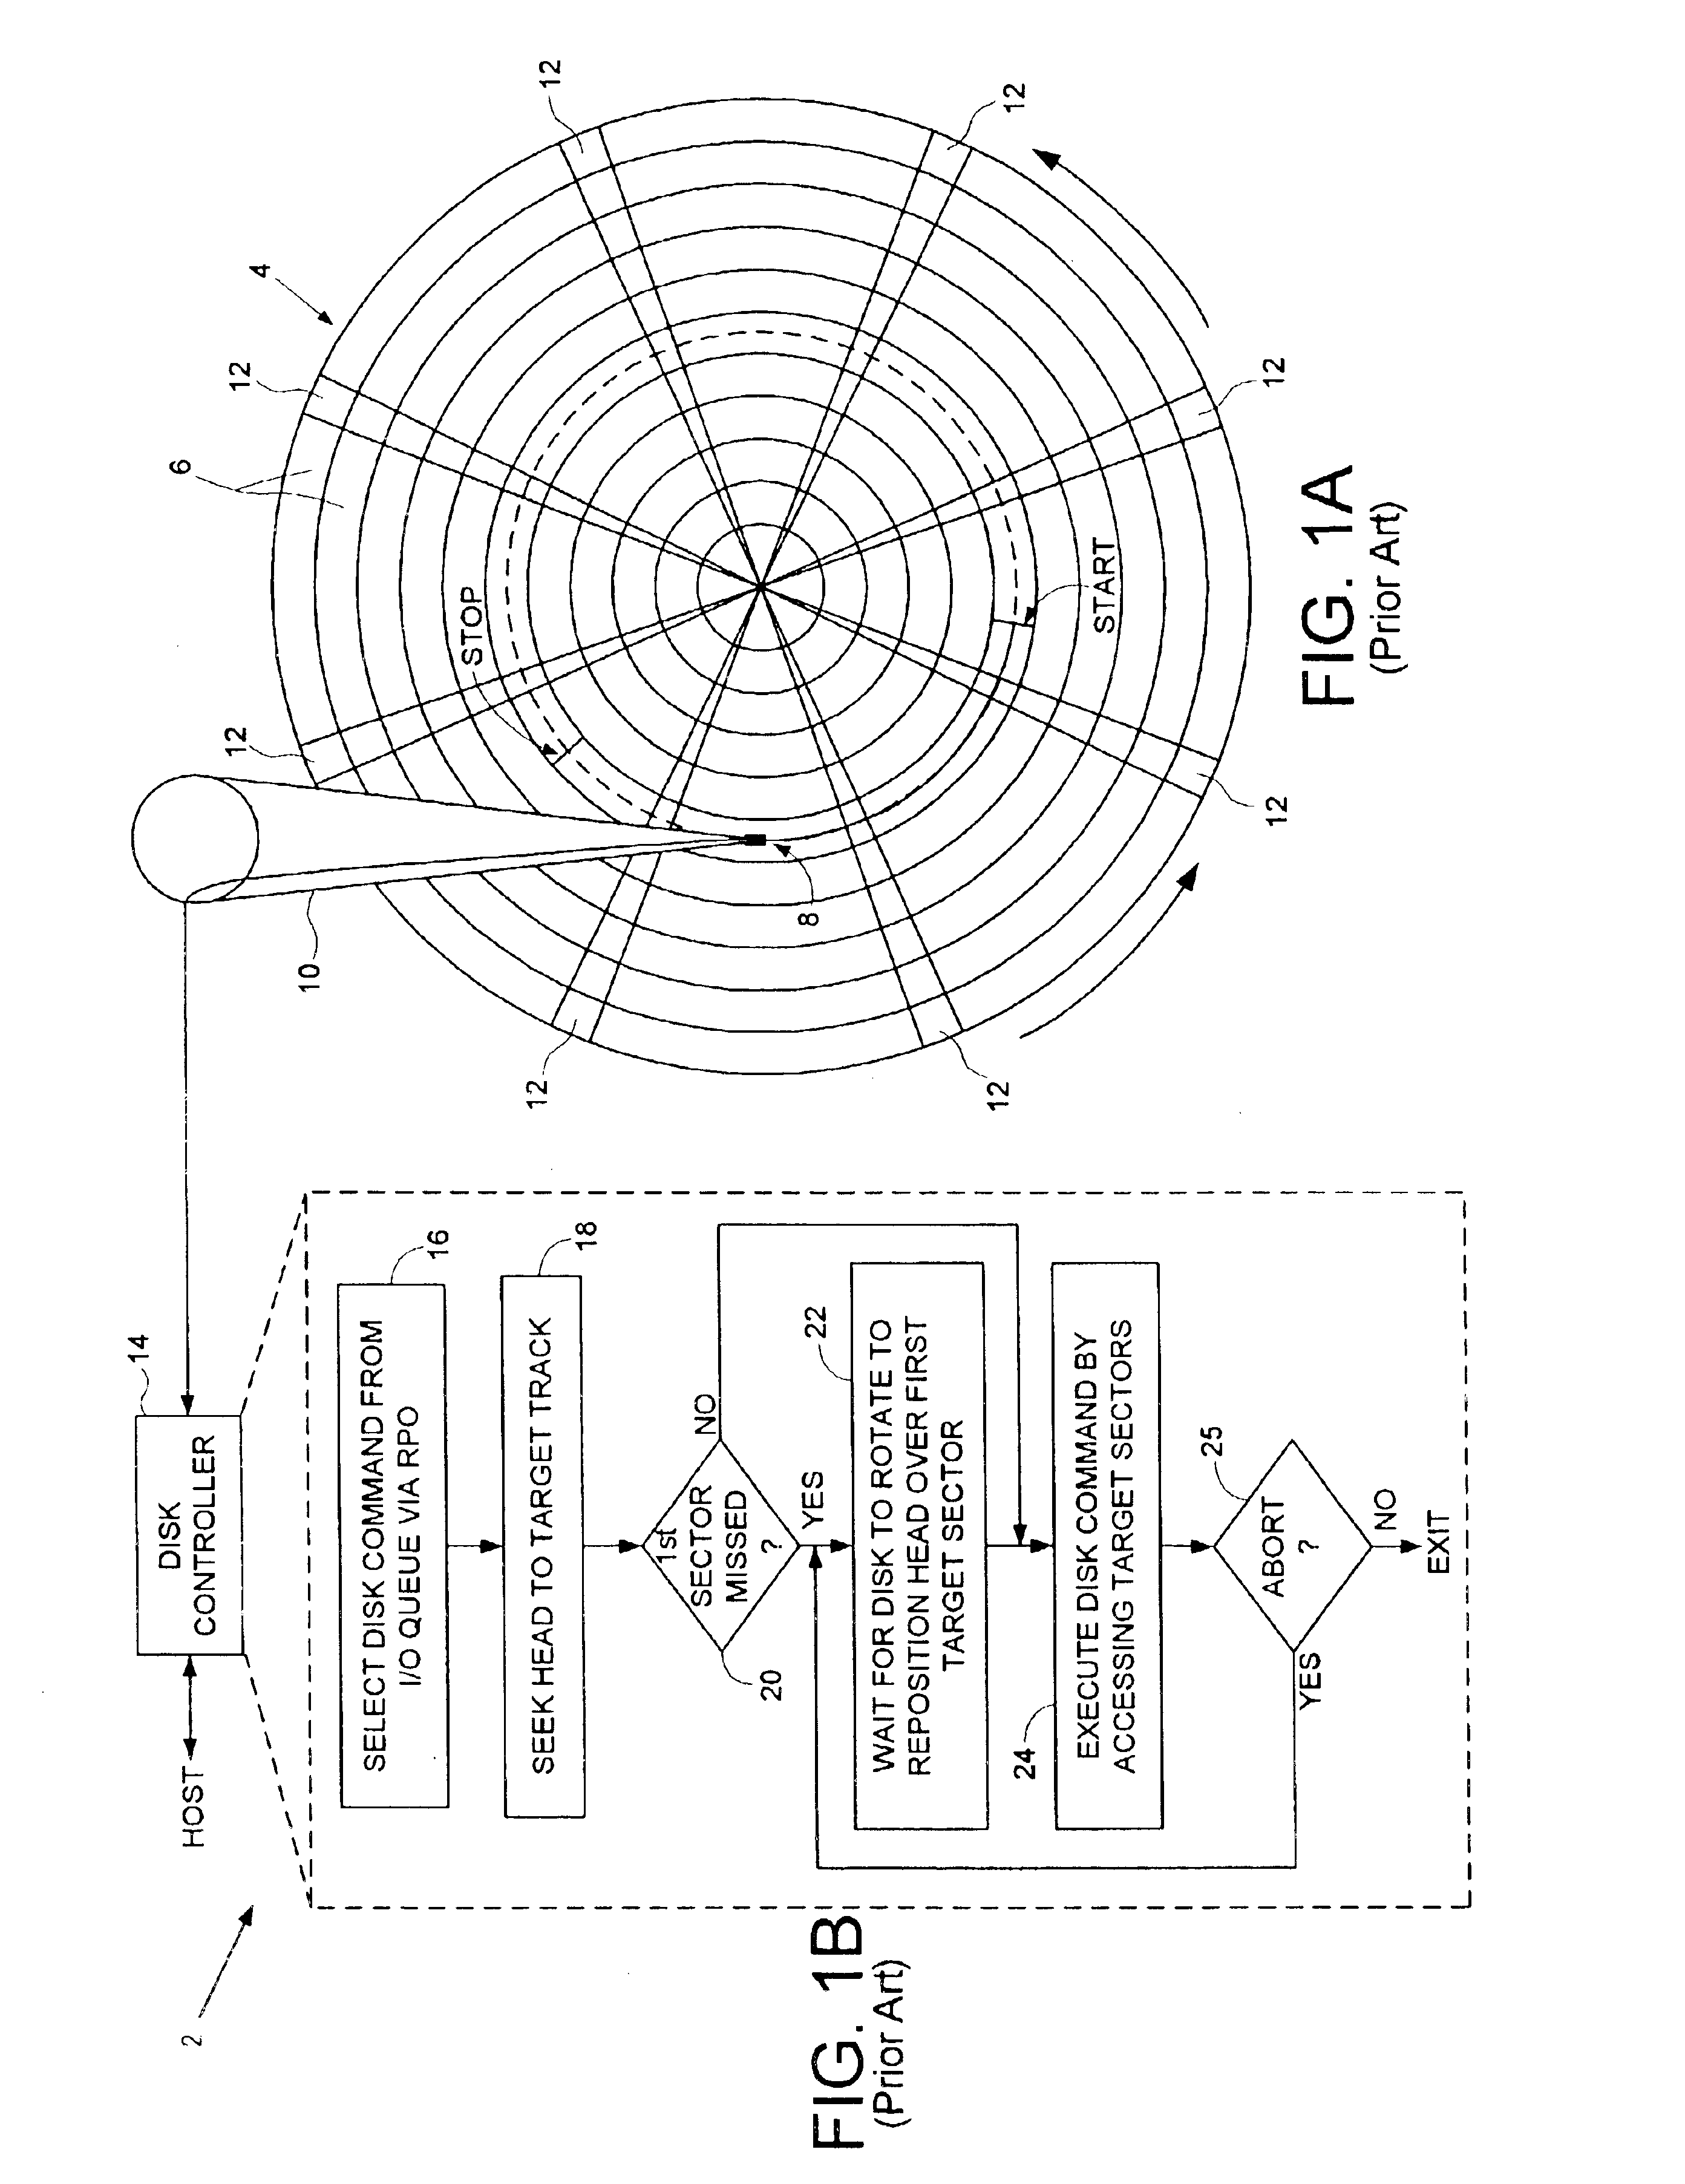 Disk drive executing part of a linked disk command